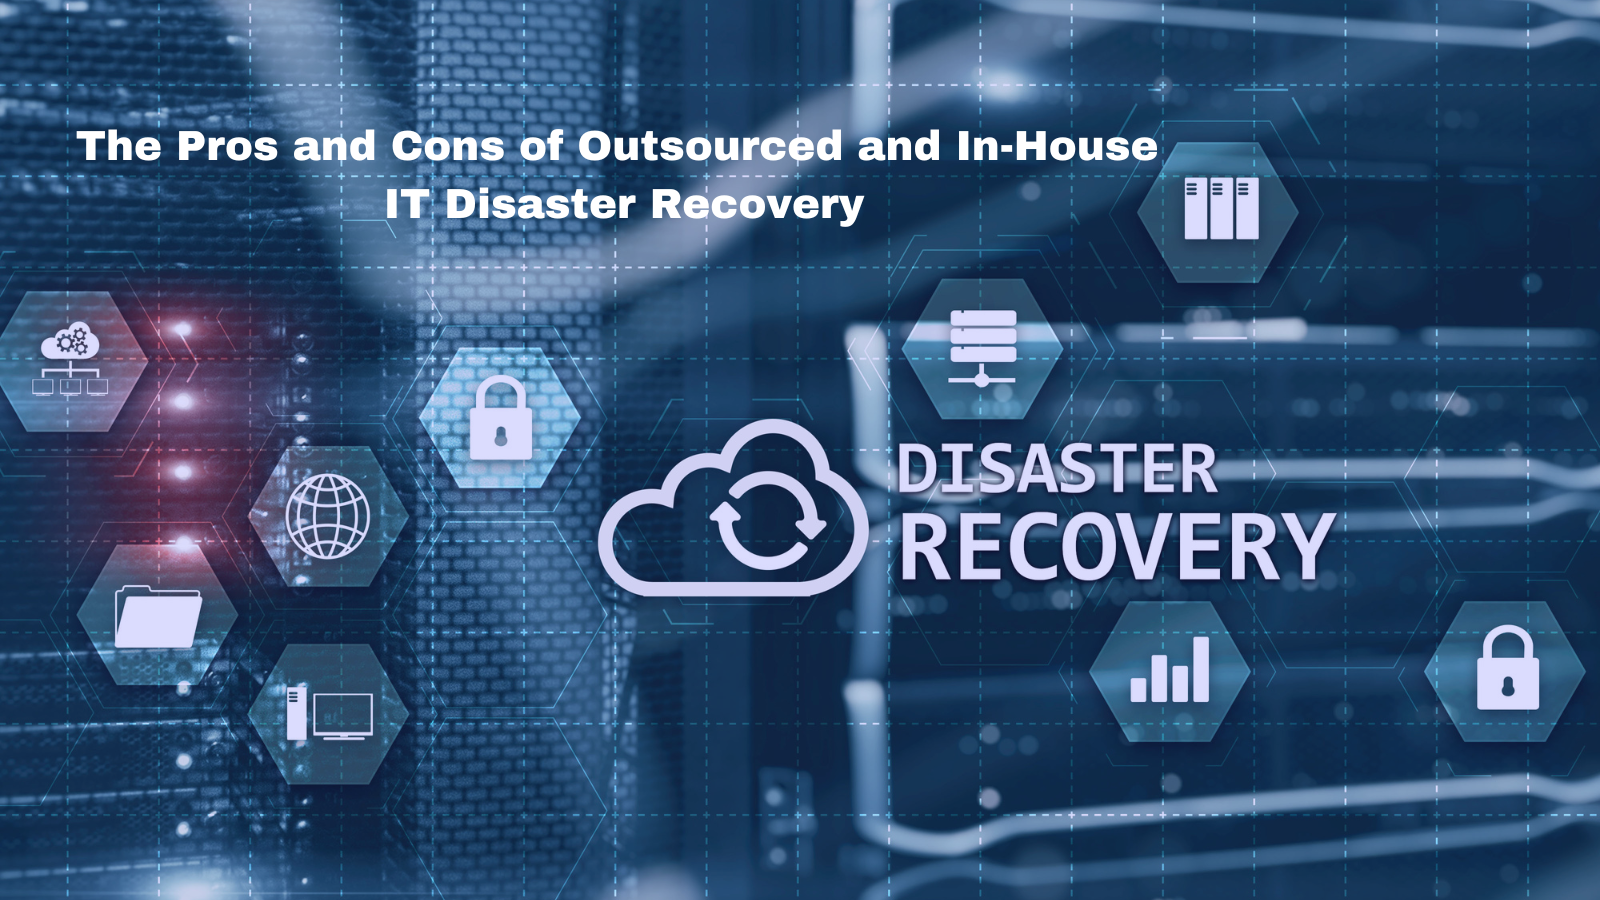 The Pros and Cons of Outsourced vs In-House IT Disaster Recovery